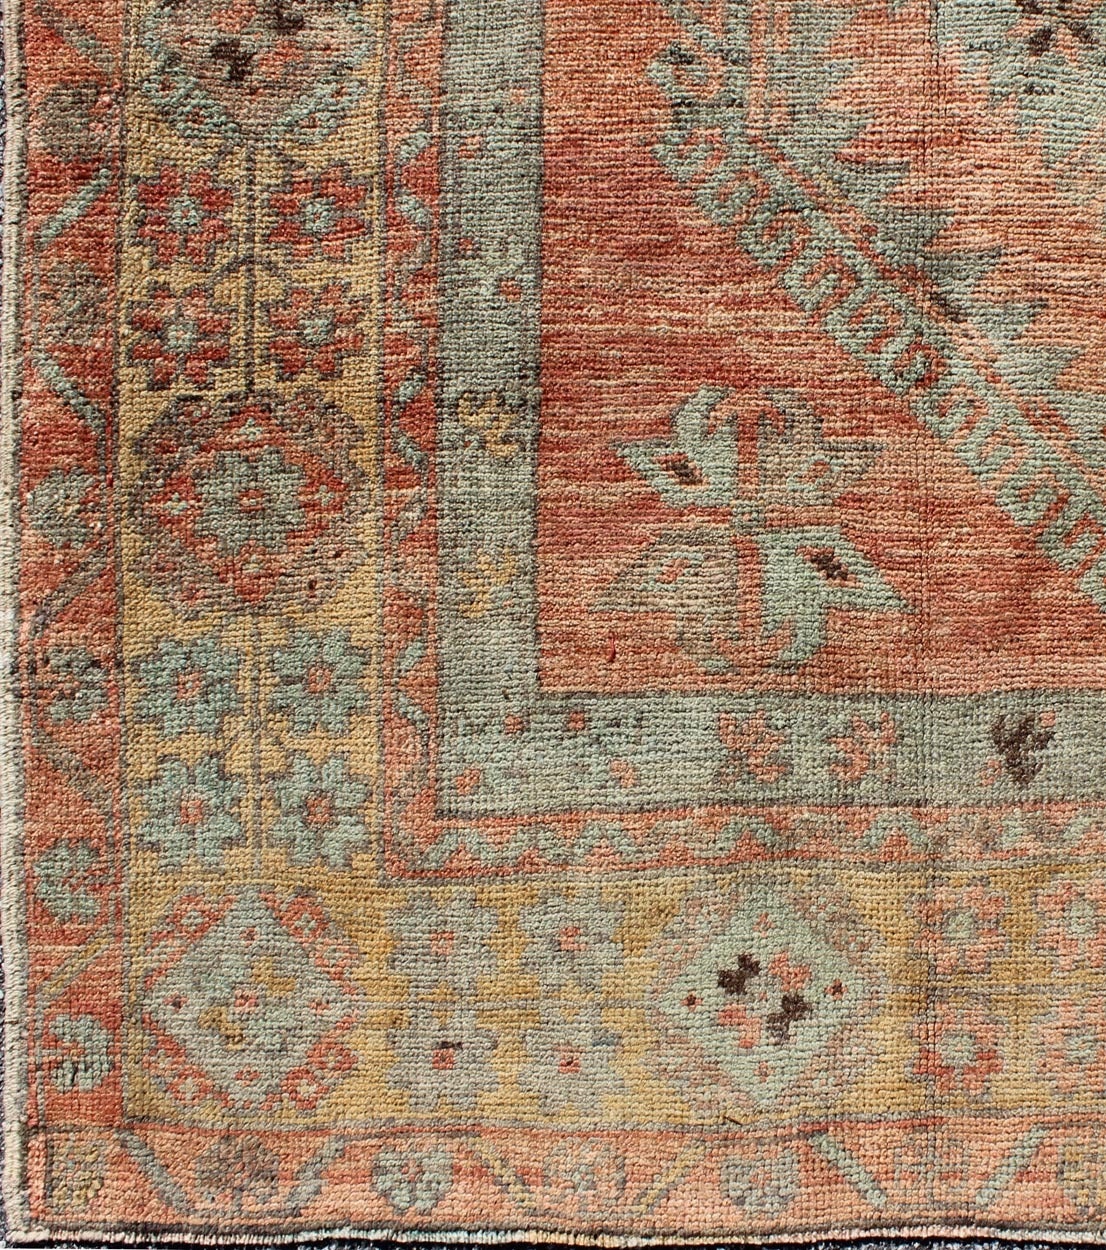 This Oushak gallery runner contains subtle tones of coral, taupe, beige, soft gold, light teal and green, which are highlighted by chocolate and mocha colors. The stylized center medallions accentuate a botanic theme and are surrounded by muted